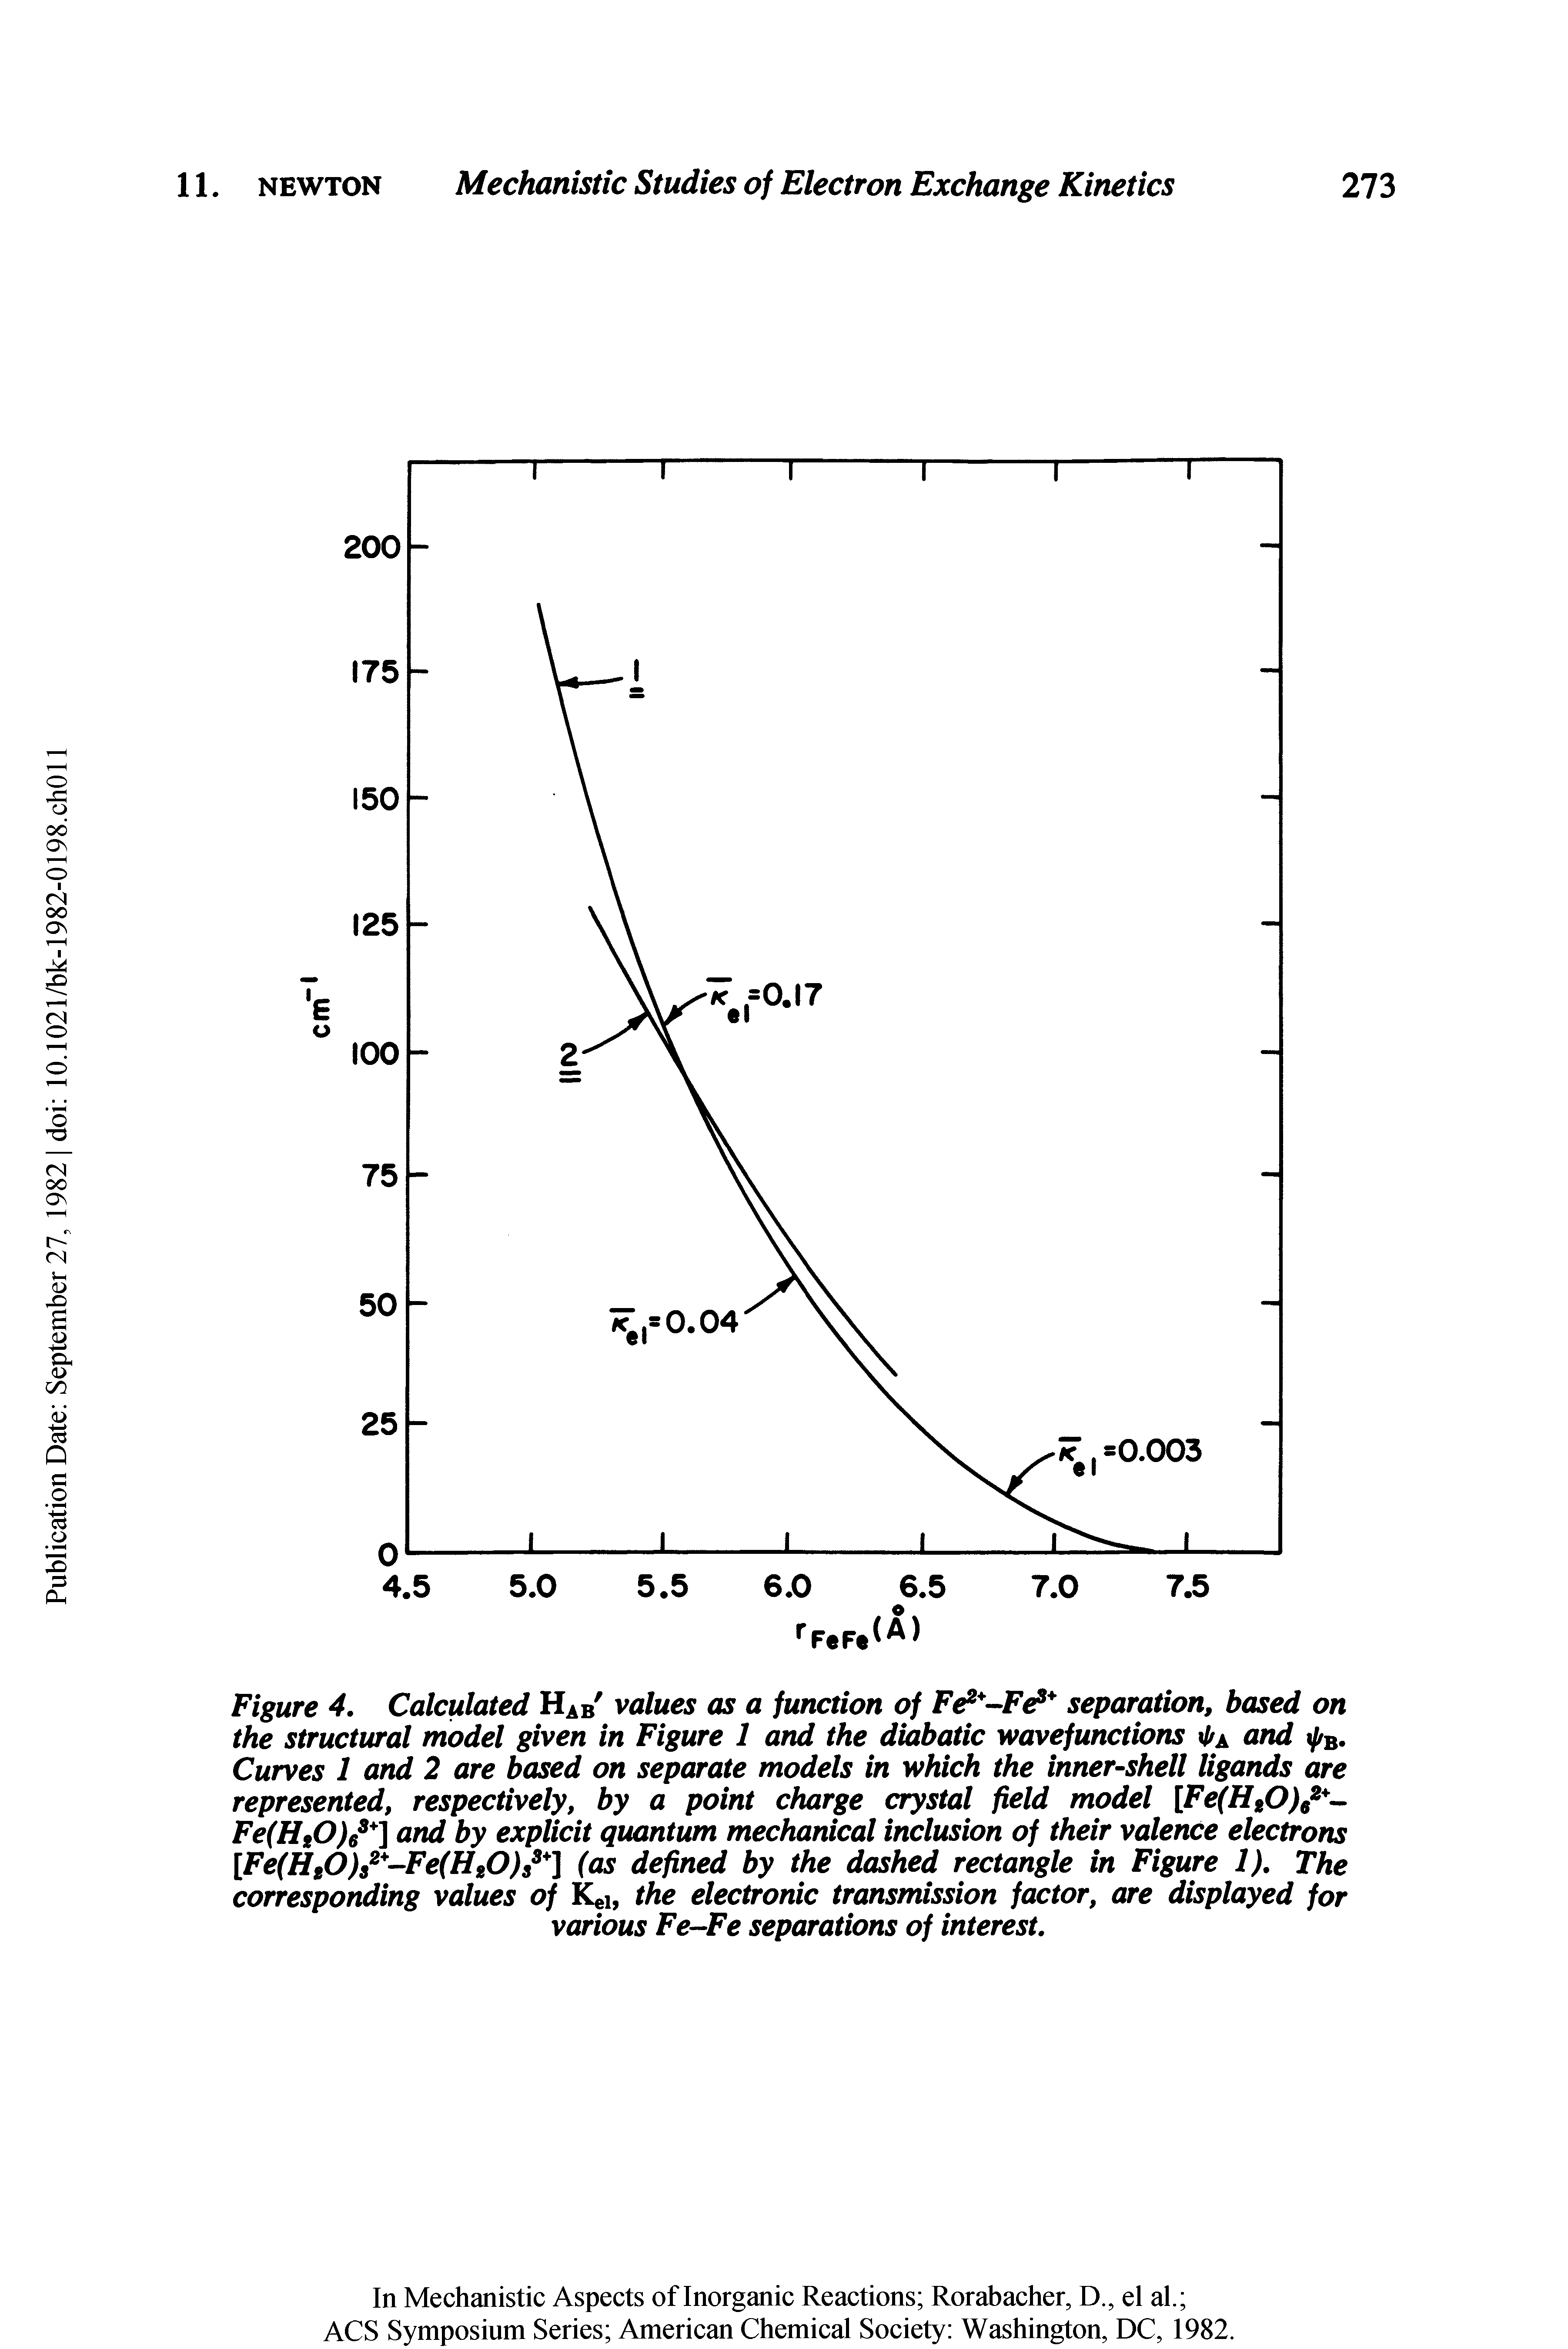 Figure 4. Calculated HAB values as a function of Fe -Fe separation, based on the structural model given in Figure 1 and the diabatic wavefunctions I/a and f/B. Curves 1 and 2 are based on separate models in which the inner-shell ligands are represented, respectively, by a point charge crystal field model [Fe(H20)62 -Fe(HsO)63 ] and by explicit quantum mechanical inclusion of their valence electrons [Fe(HgO)s2 -Fe(H20)s3+] (as defined by the dashed rectangle in Figure 1). The corresponding values of Kei, the electronic transmission factor, are displayed for various Fe-Fe separations of interest.